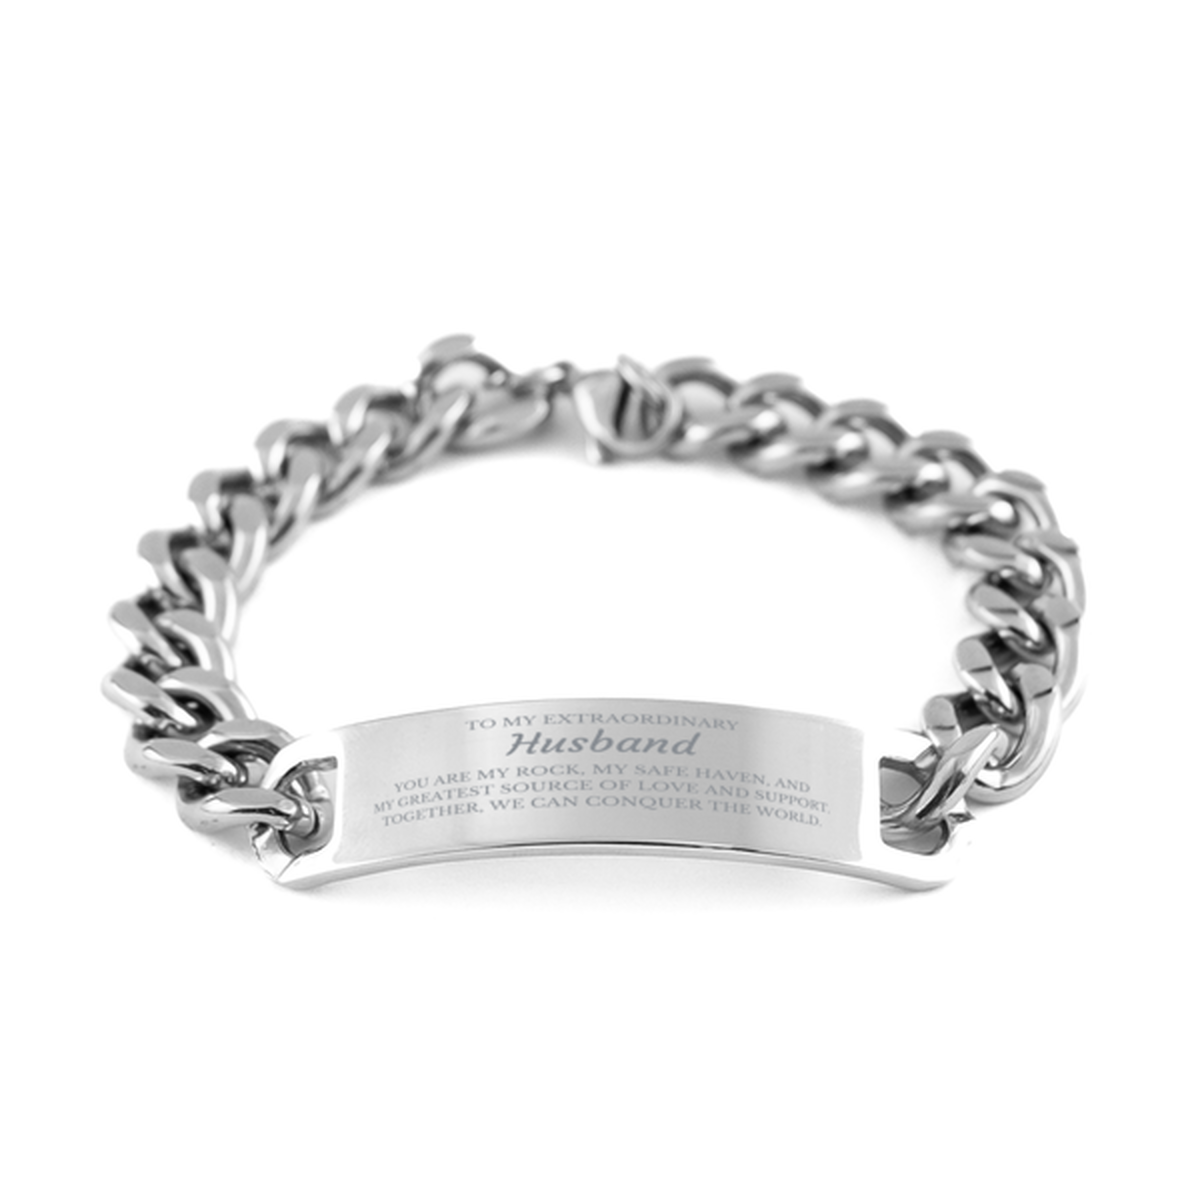 To My Extraordinary Husband Gifts, Together, we can conquer the world, Birthday Cuban Chain Stainless Steel Bracelet For Husband, Christmas Gifts For Husband